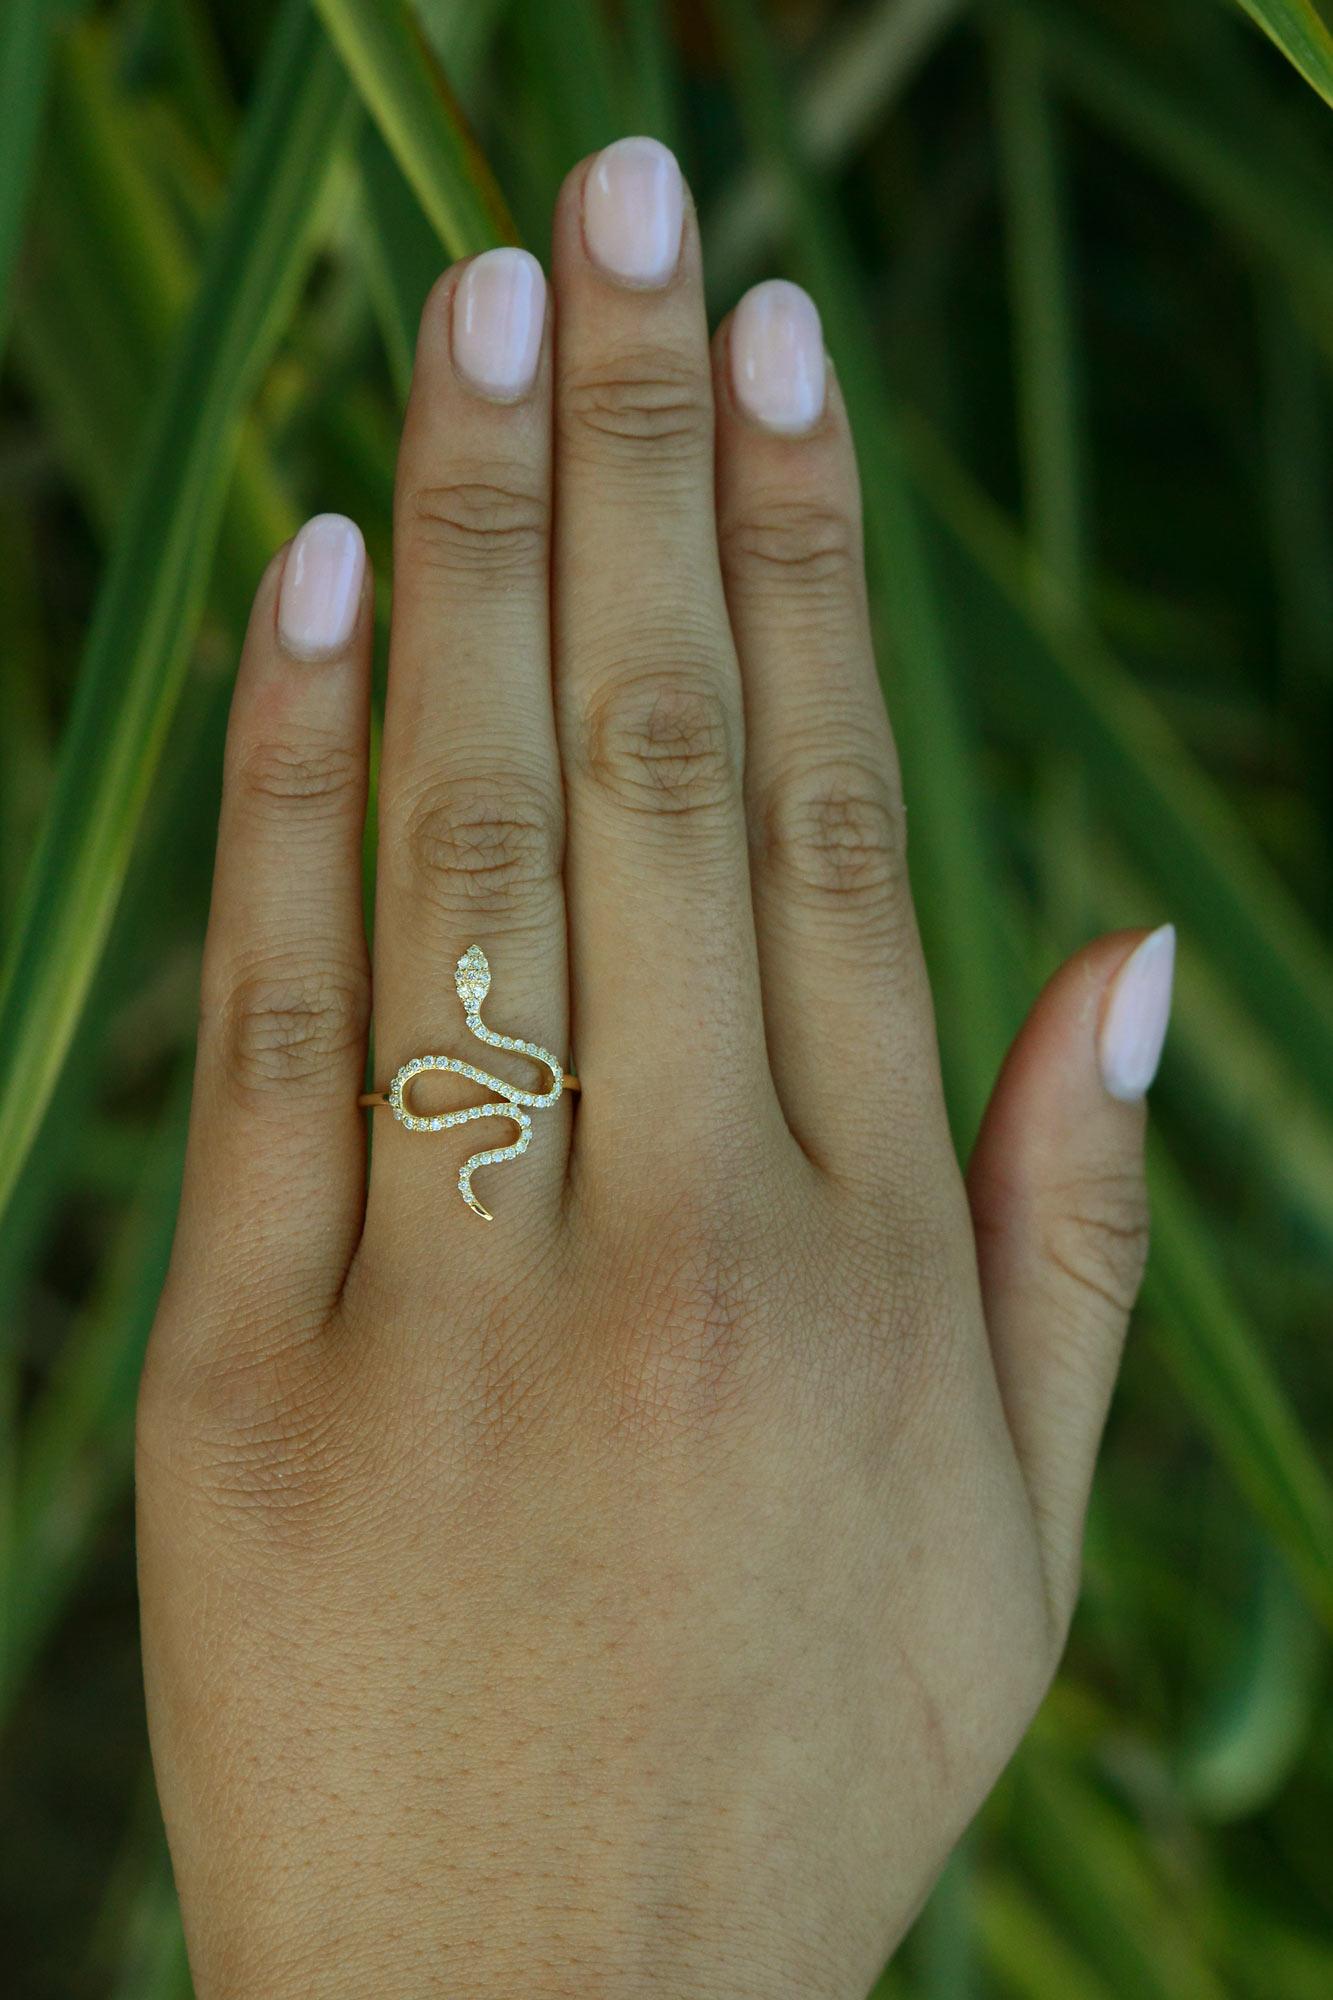 A contemporary and luxurious snake ring, paying homage to Egyptian style jewelry with a modern twist. The slinky serpent adorned with intricate pavé set diamonds total over a quarter carat in weight, set in enduring 14 karat yellow gold. The narrow